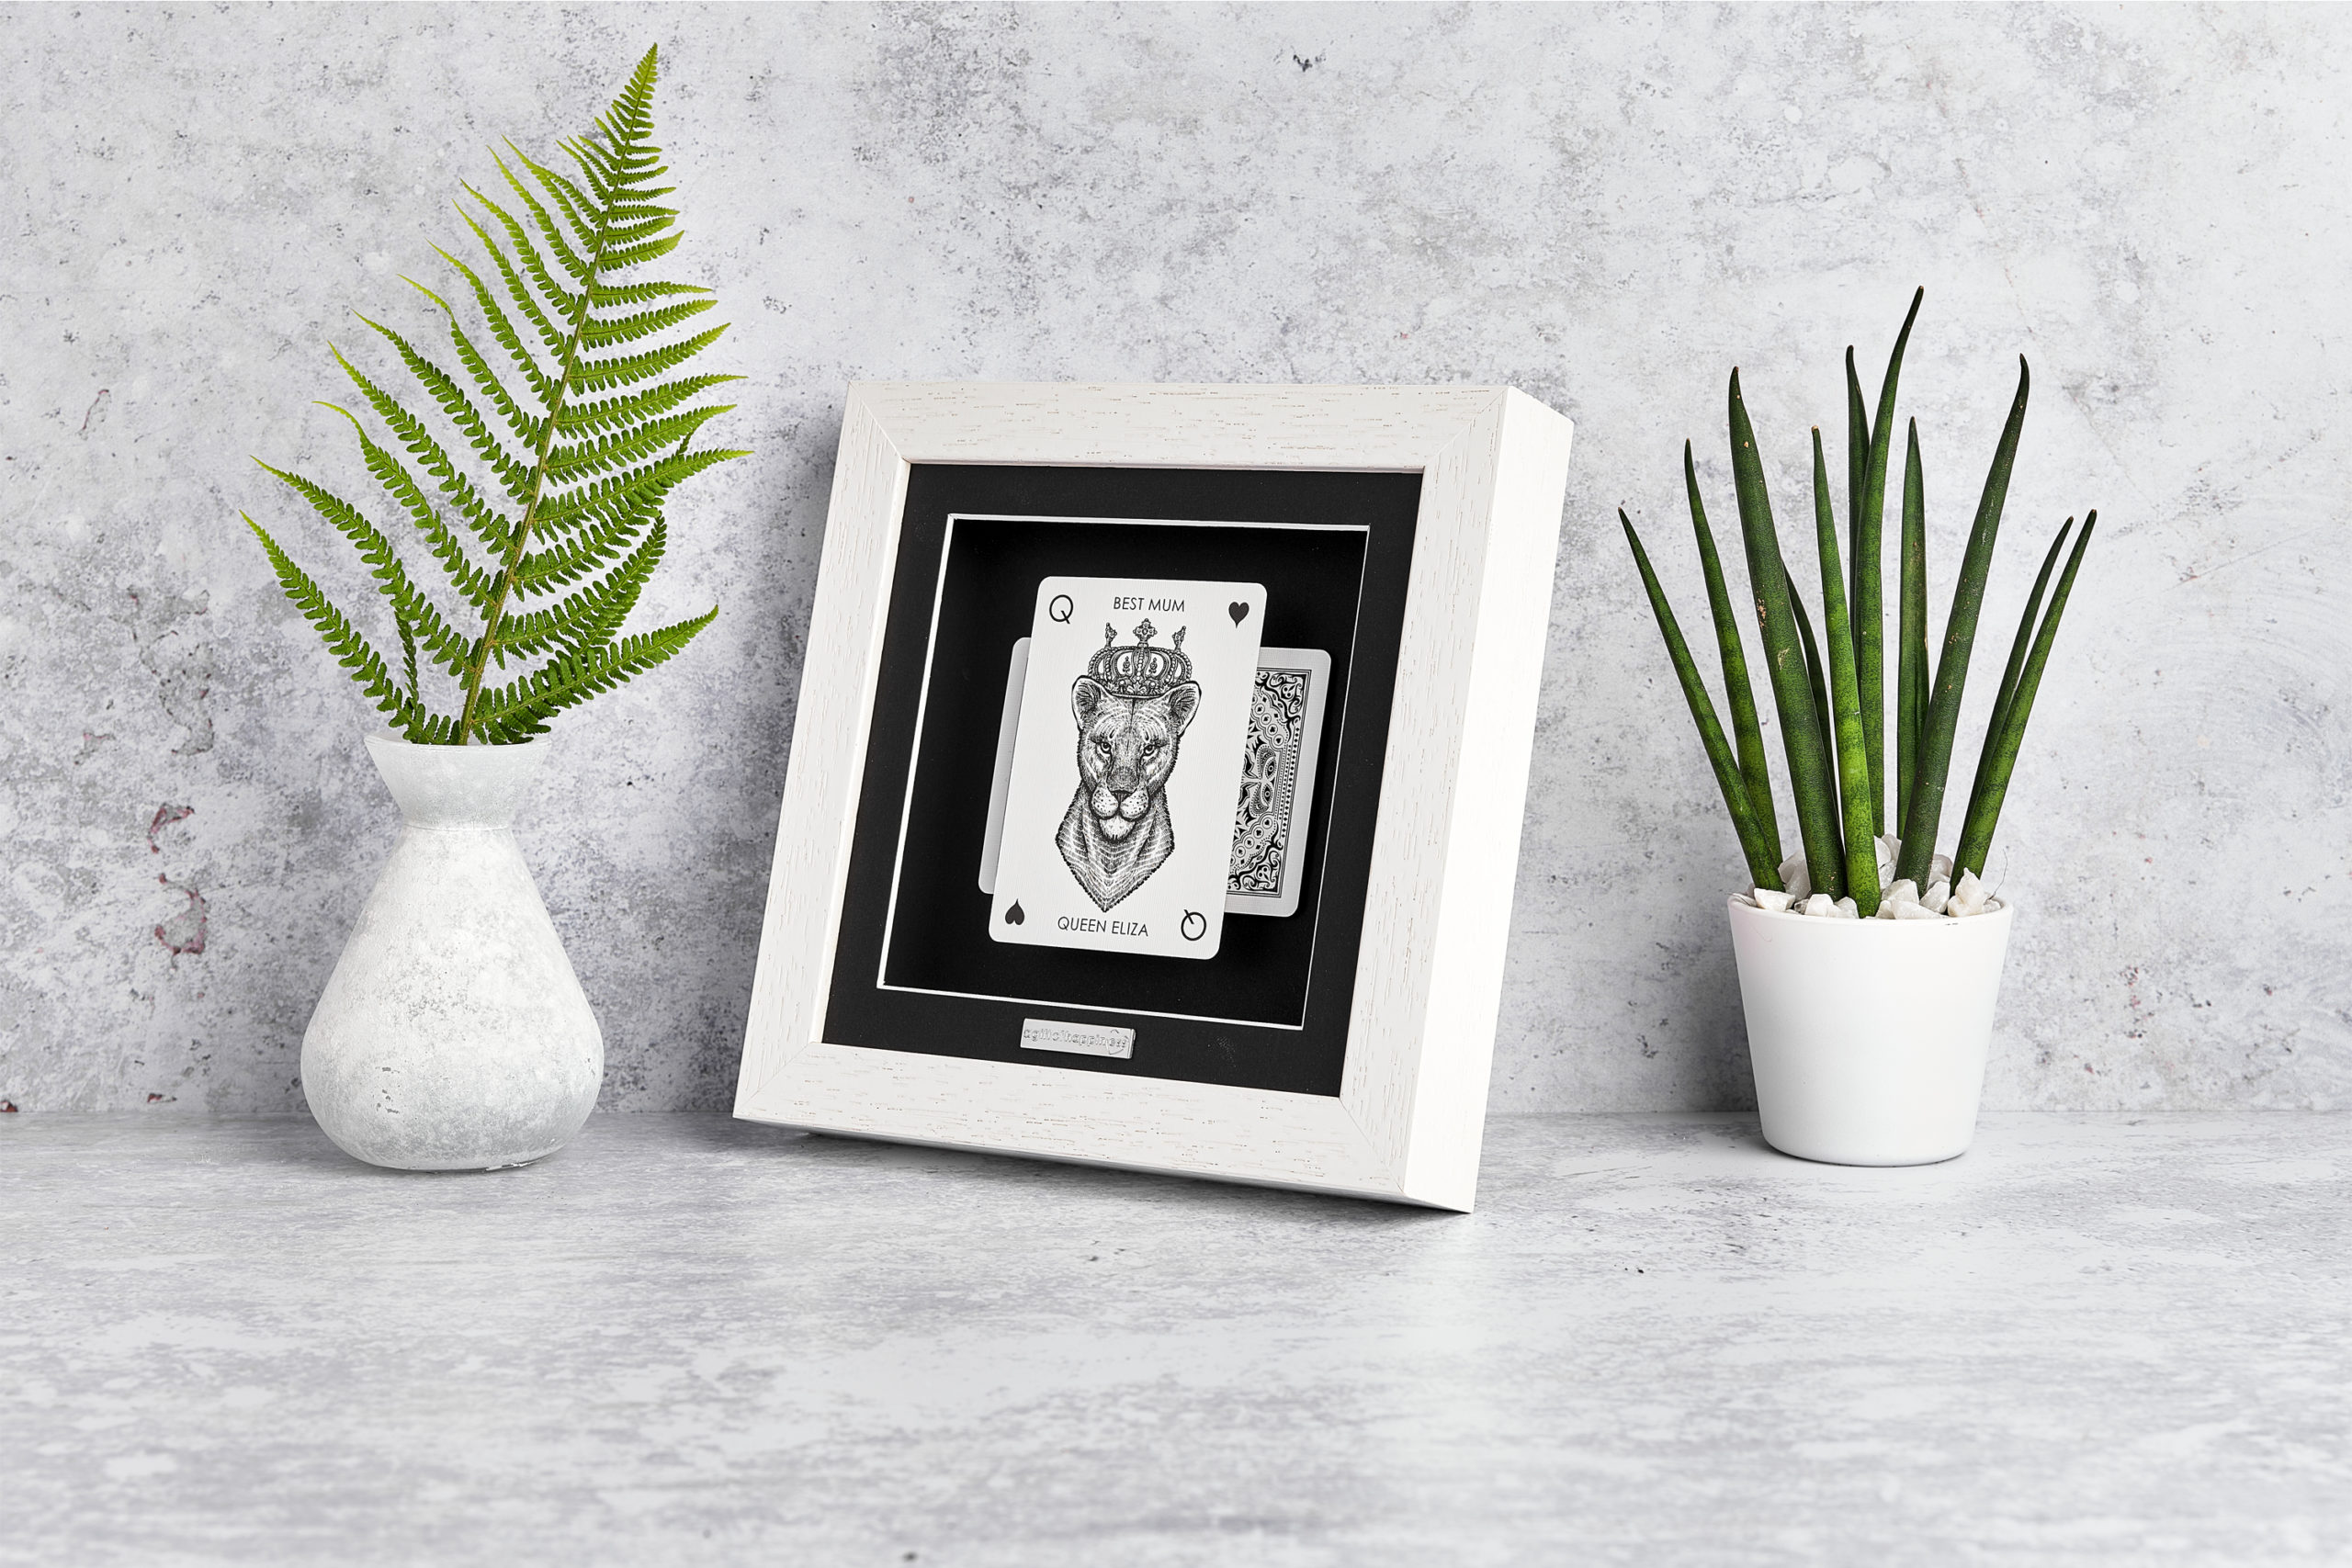 Best Mum Personalised Lioness Playing Card 3D Gift Frame STRUTT SQ